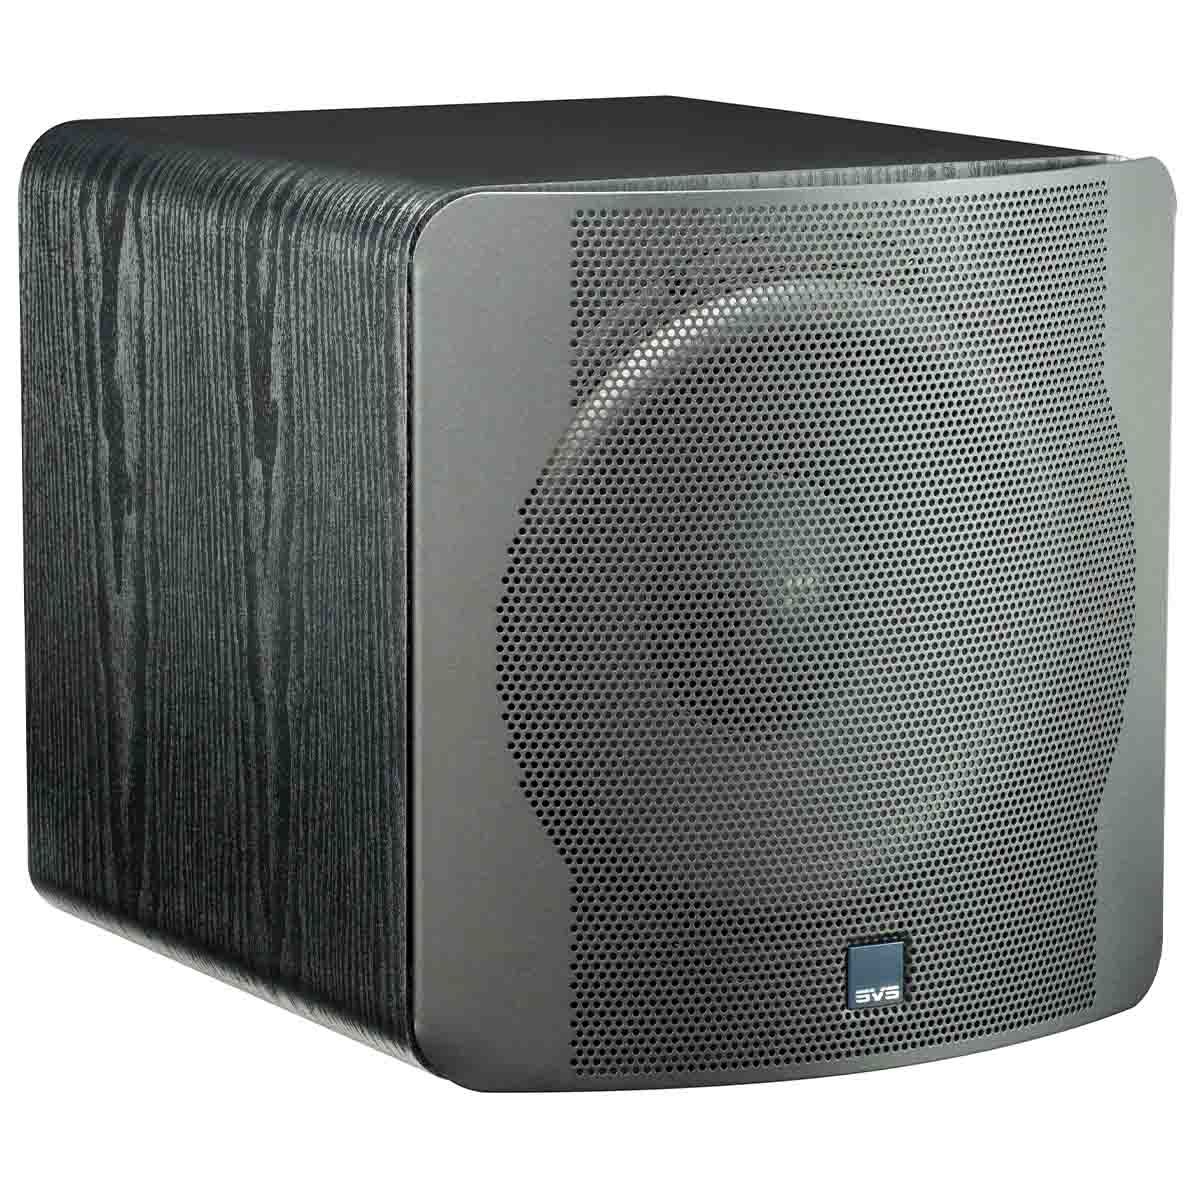 SVS SB-2000 12" Compact Sealed Subwoofer - Premium Black Ash - angled top view with grille